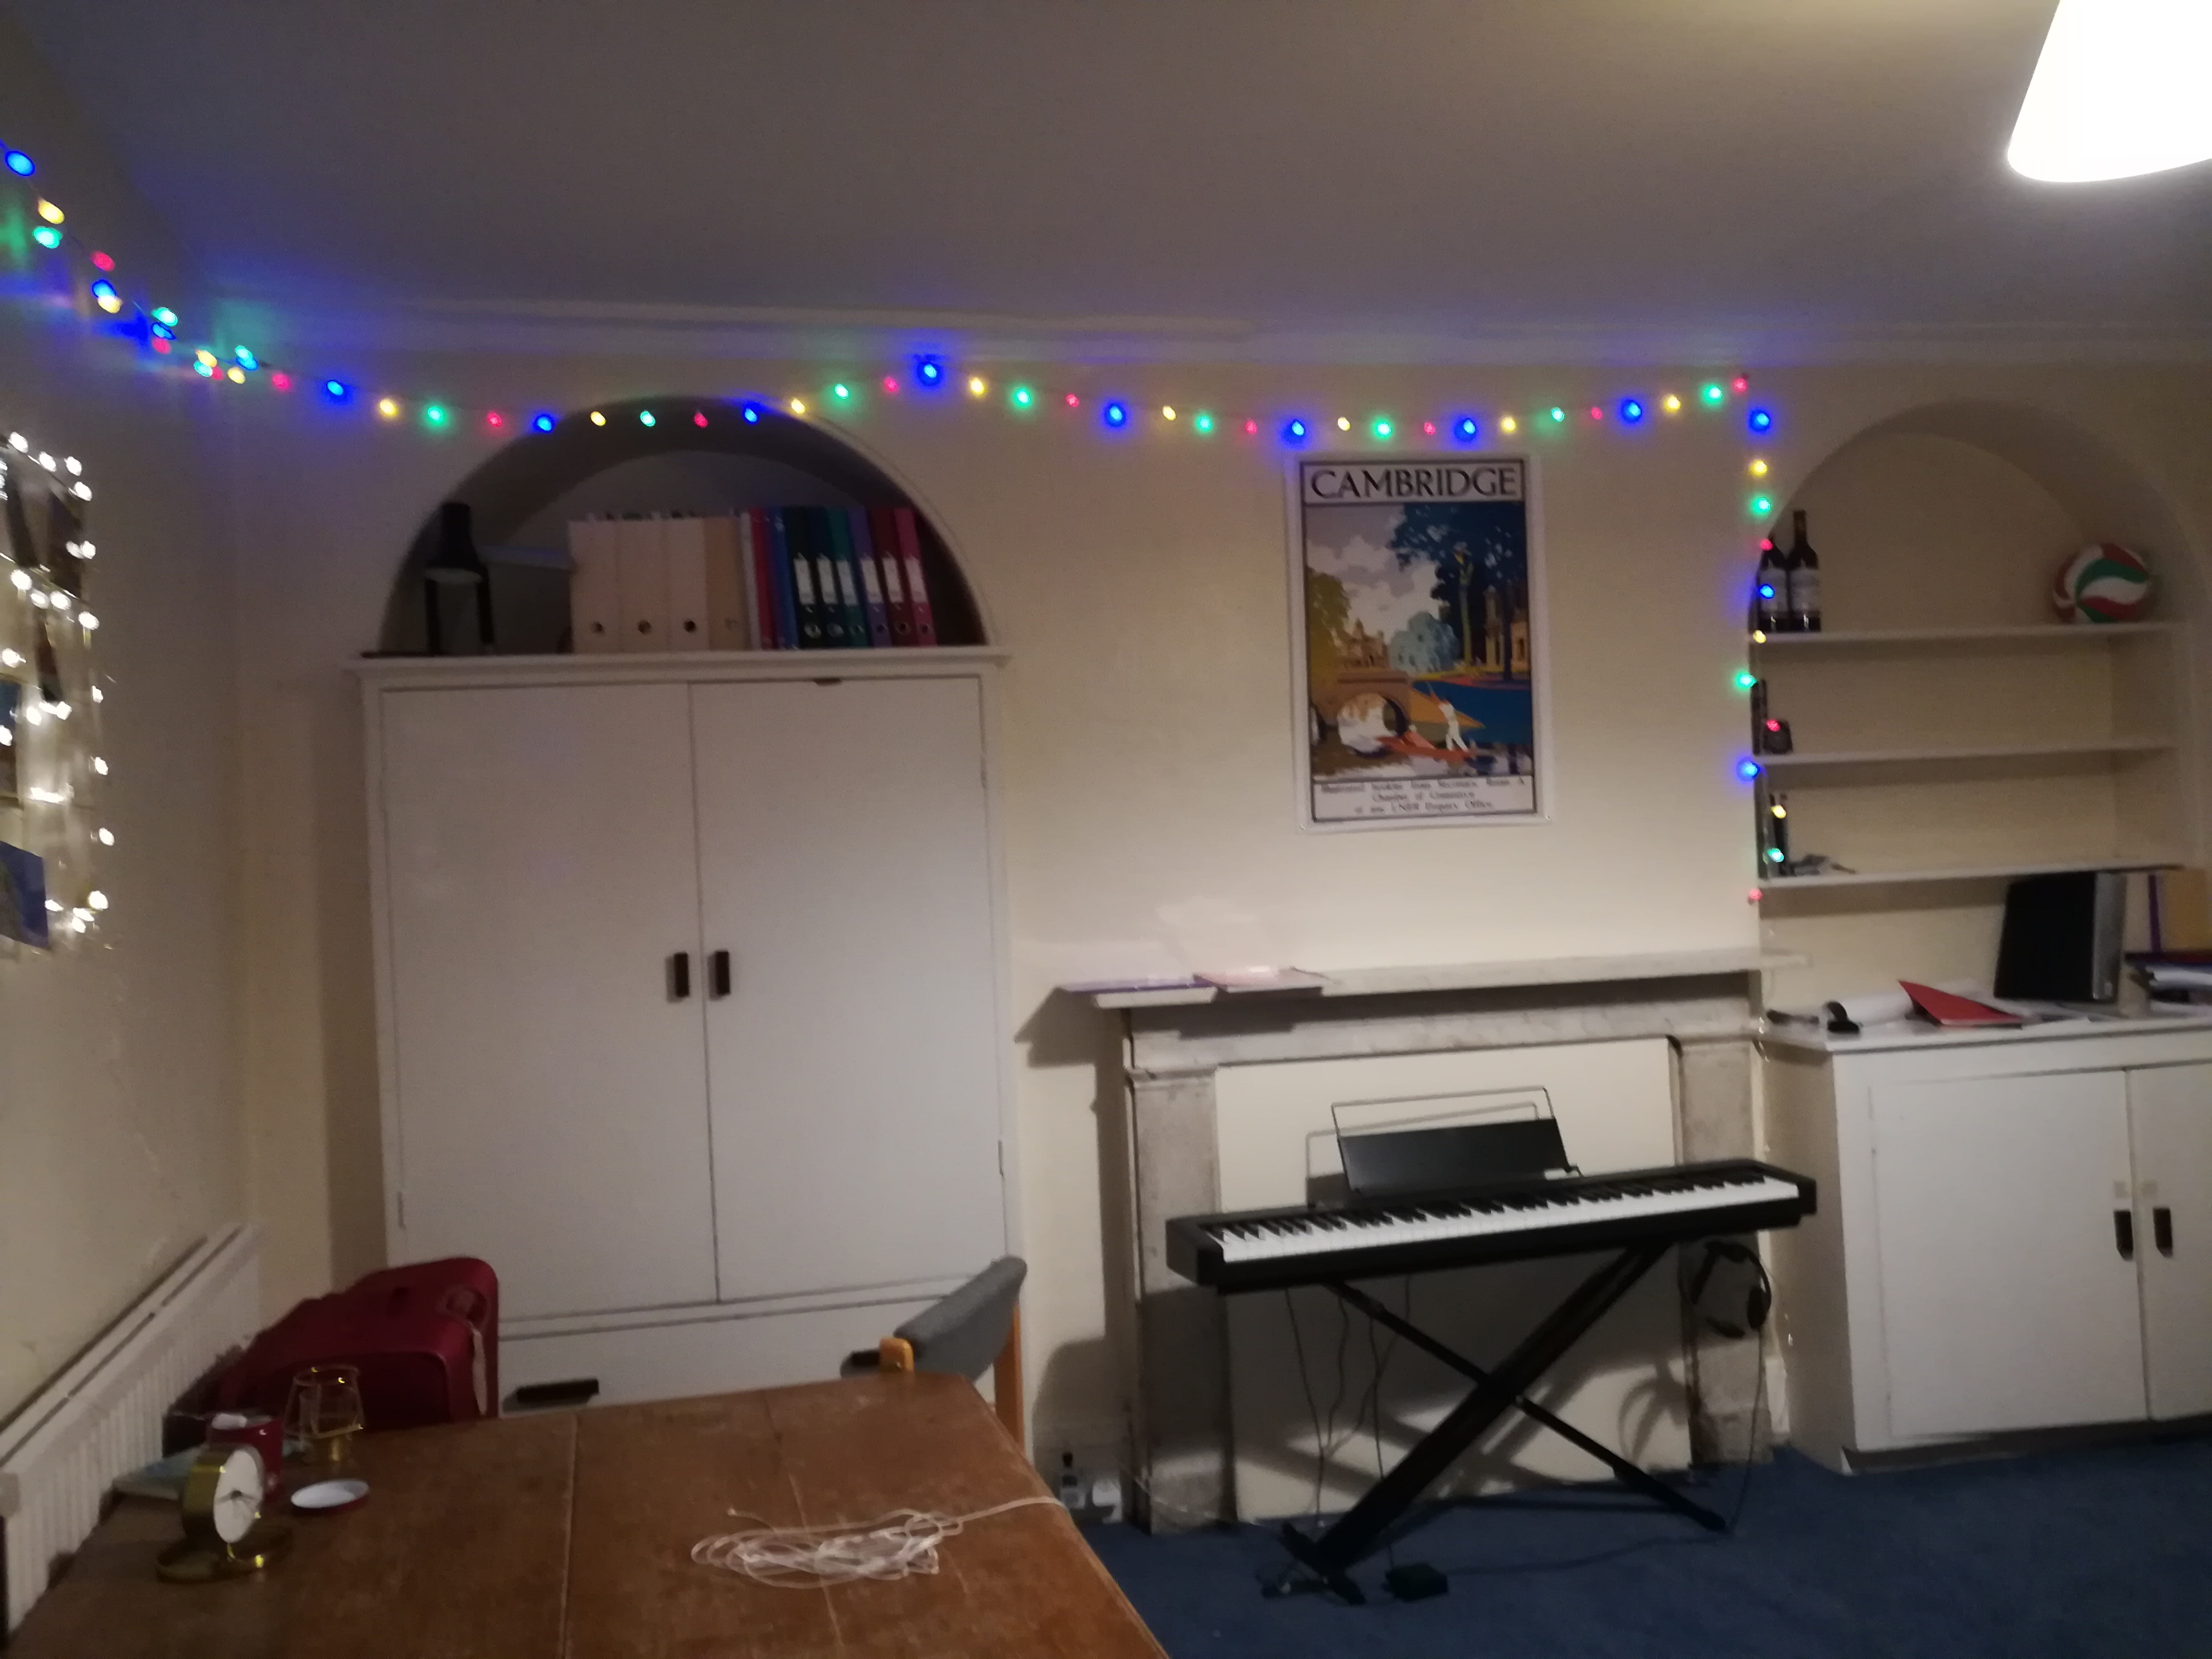 A student room, spacious with fairly lights, a keyboard, a shelf of folders and a poster of Cambridge